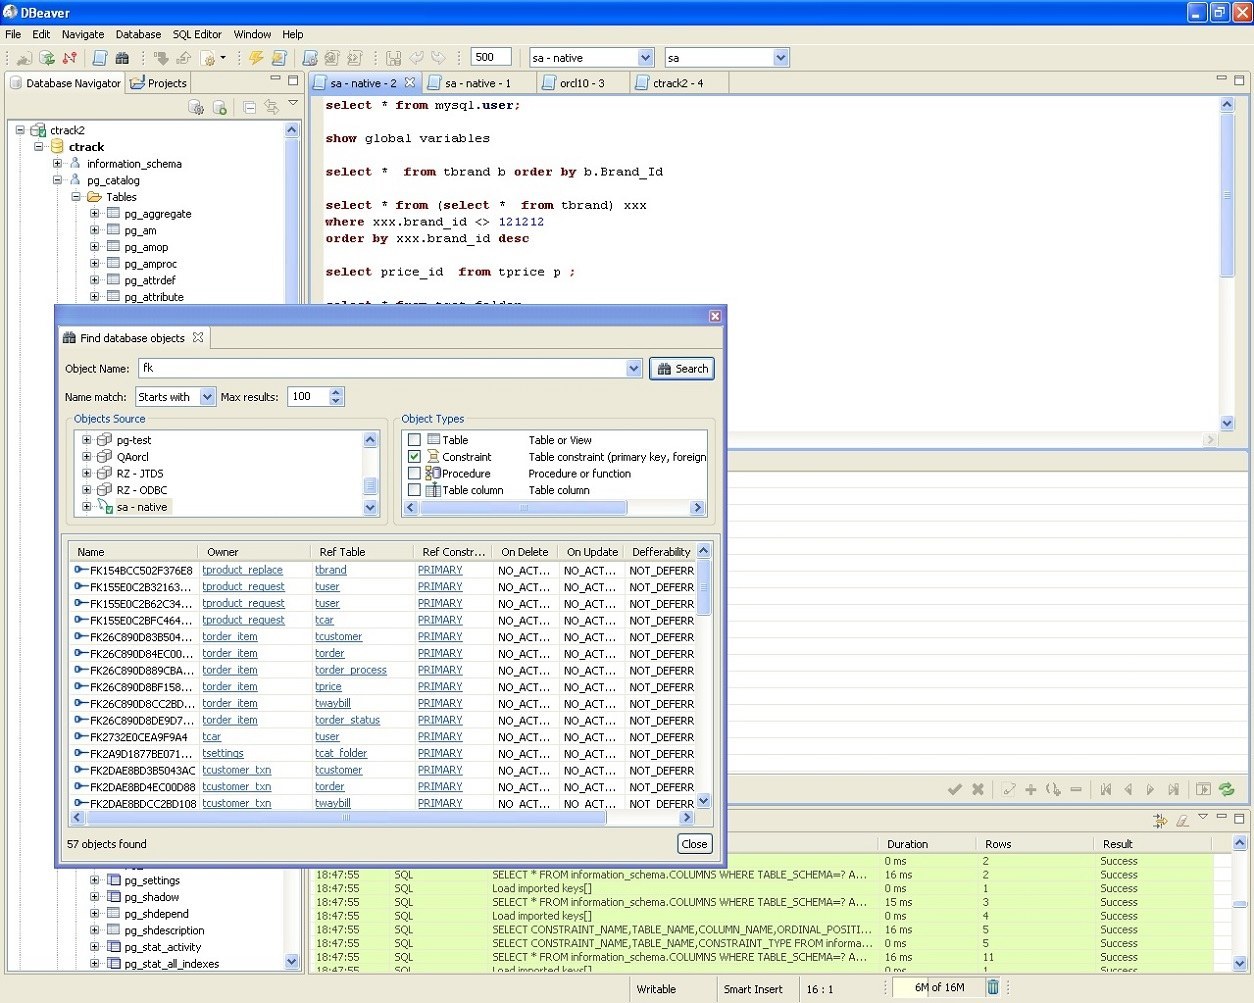 DBeaver 23.2.0 Ultimate Edition for windows download